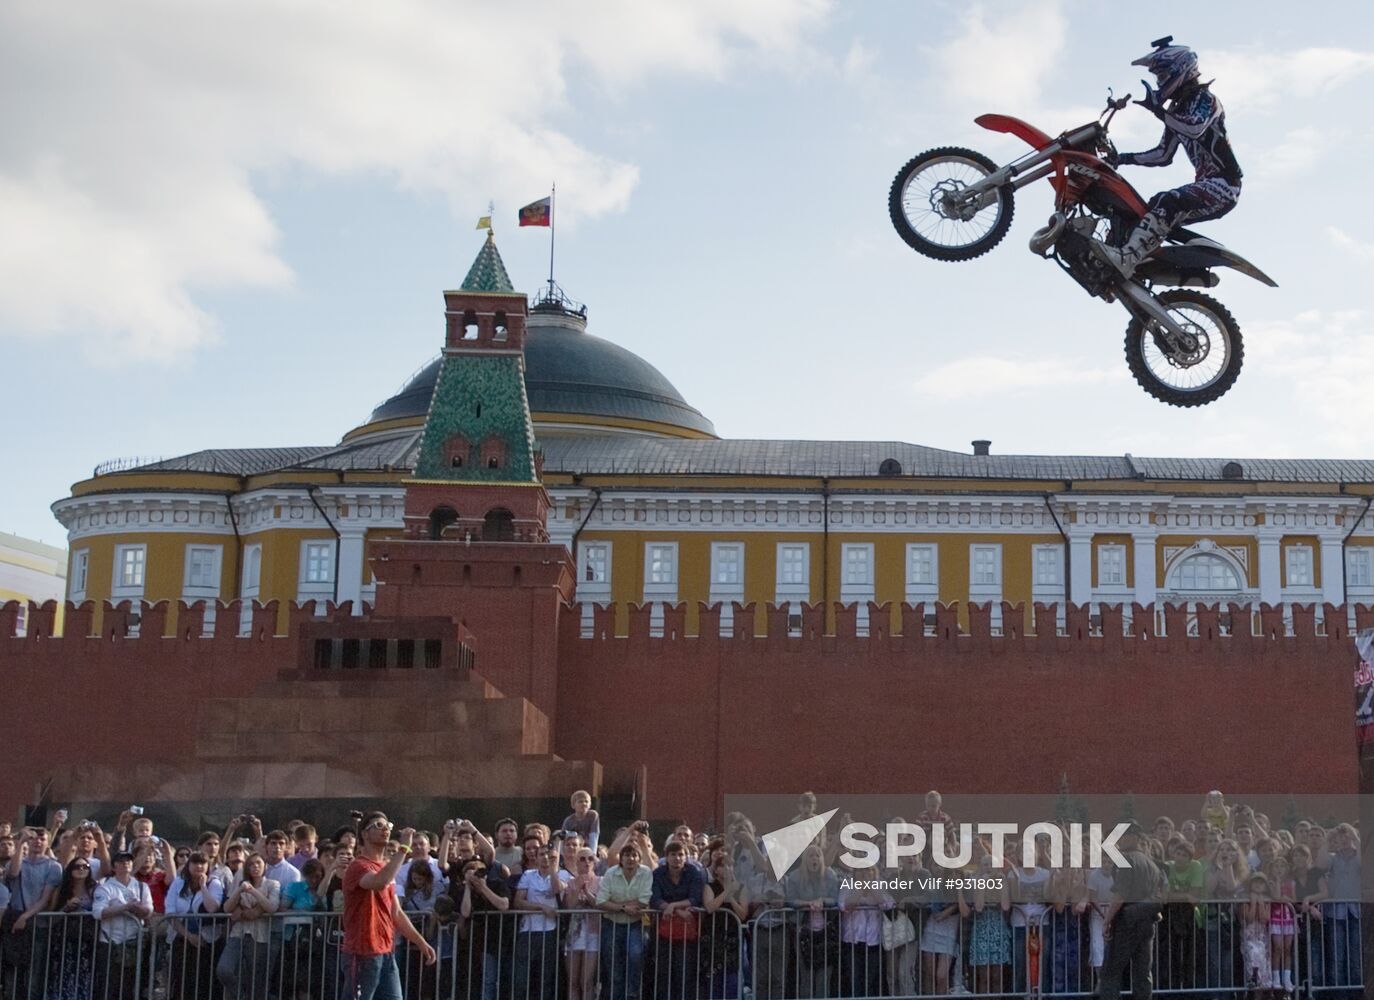 Red Bull company presents freestyle motocross show